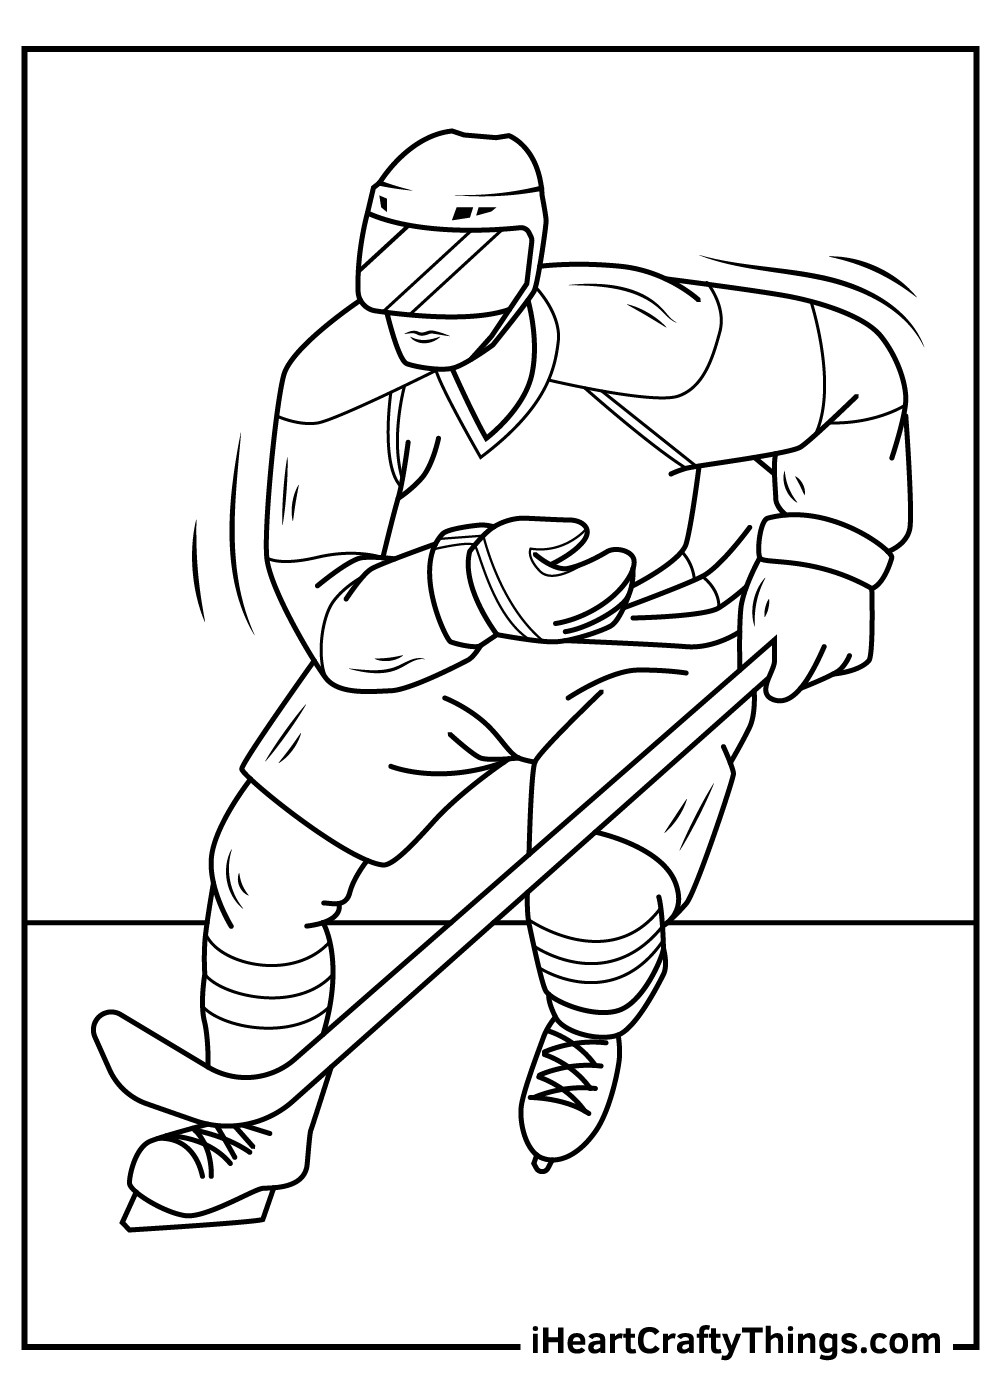 NHL Coloring Pages (Updated 2022)